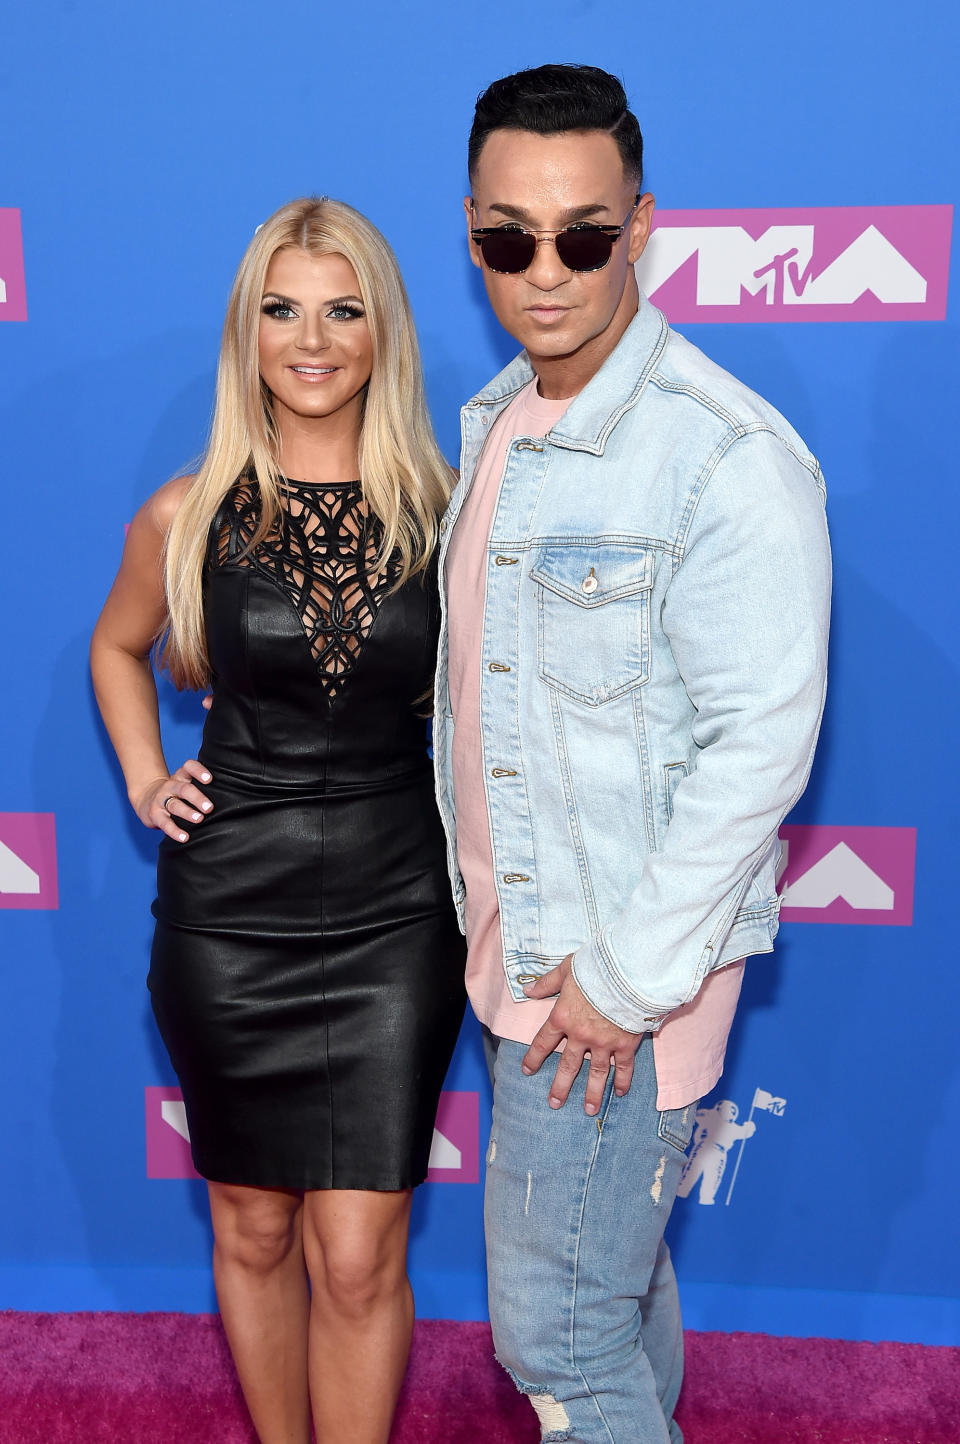 NEW YORK, NY - 20 AOÛT : Lauren Pesce et Mike « The Situation » Sorrentino assistent aux MTV Video Music Awards 2018 au Radio City Music Hall le 20 août 2018 à New York.  (Photo de Jamie McCarthy/Getty Images)